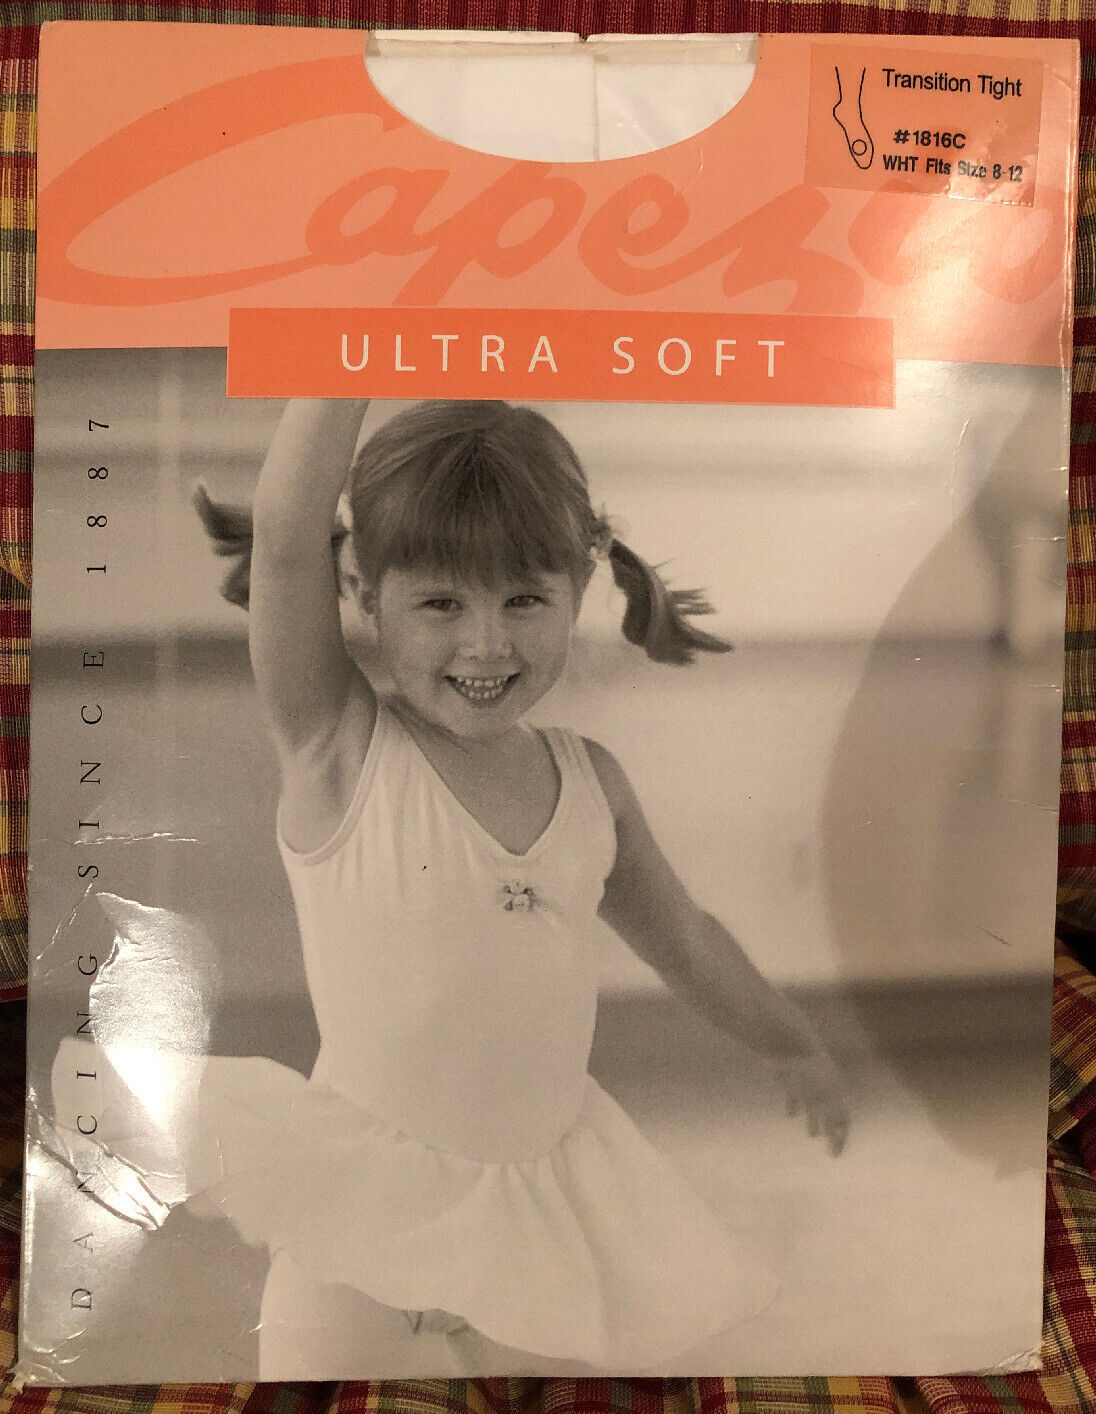 Capezio Little Girls White Ultra Fees free!! Soft Tight Size Outlet ☆ Free Shipping 8-12 Transition